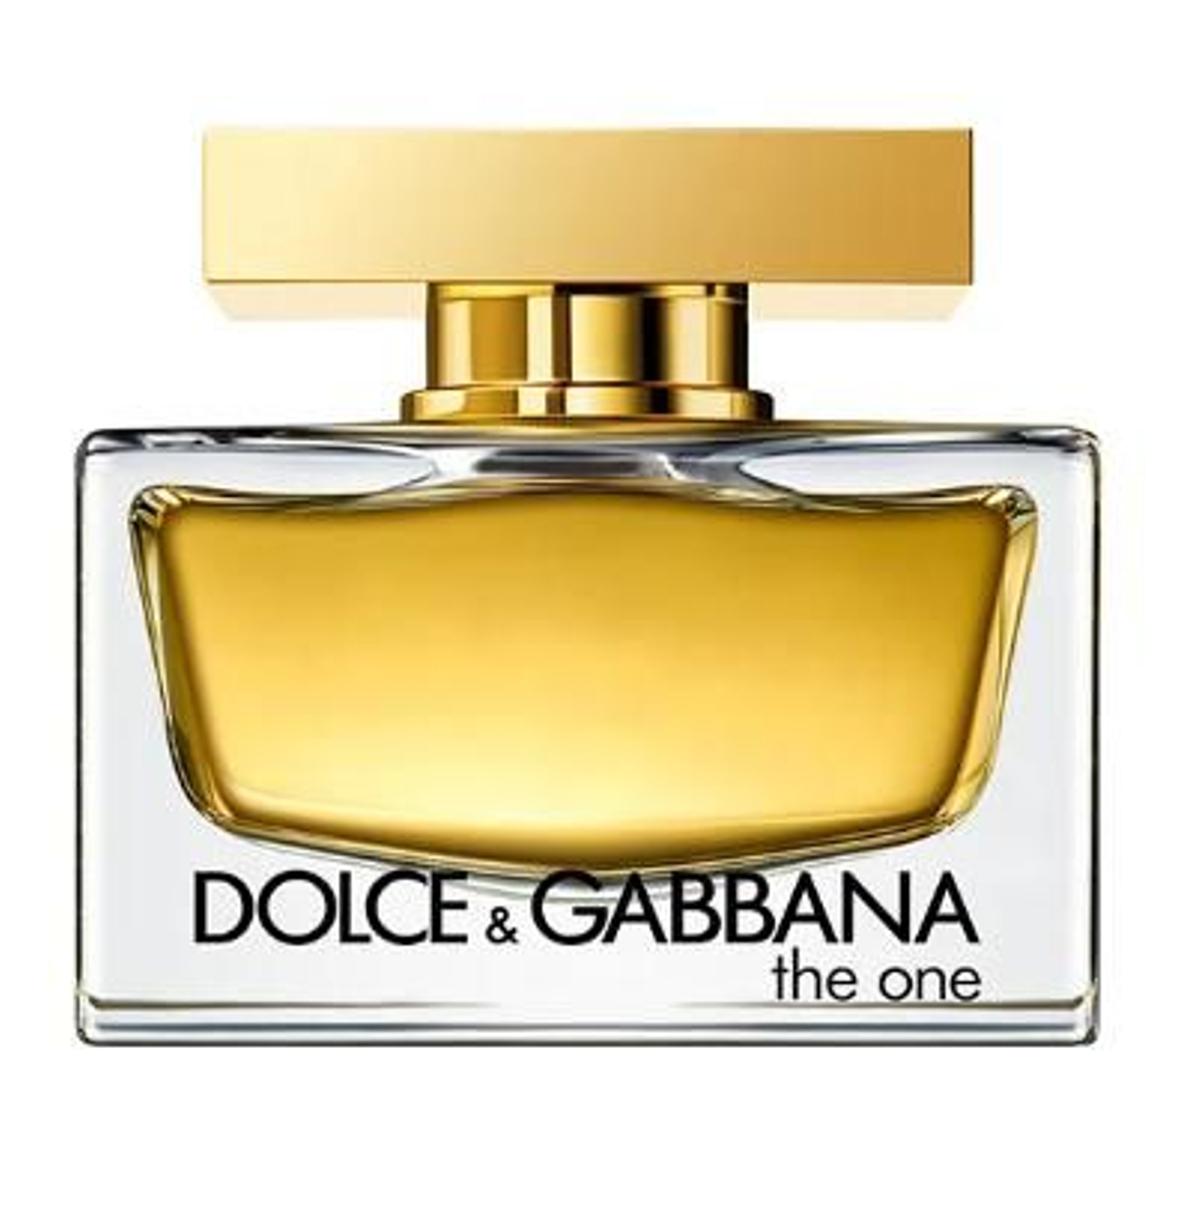 The One, de Dolce and Gabbana